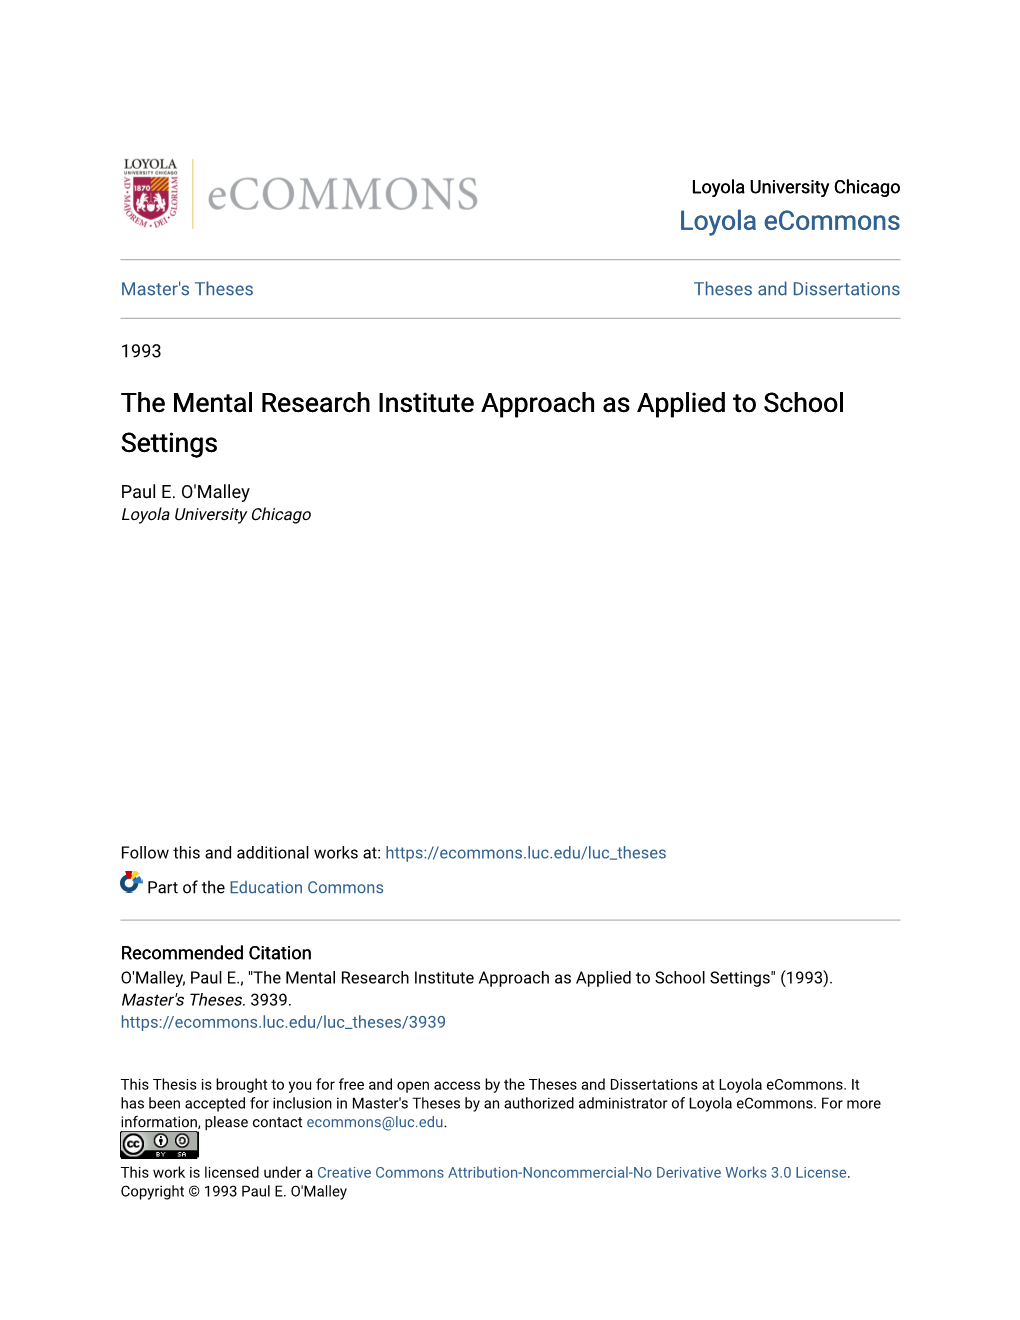 The Mental Research Institute Approach As Applied to School Settings